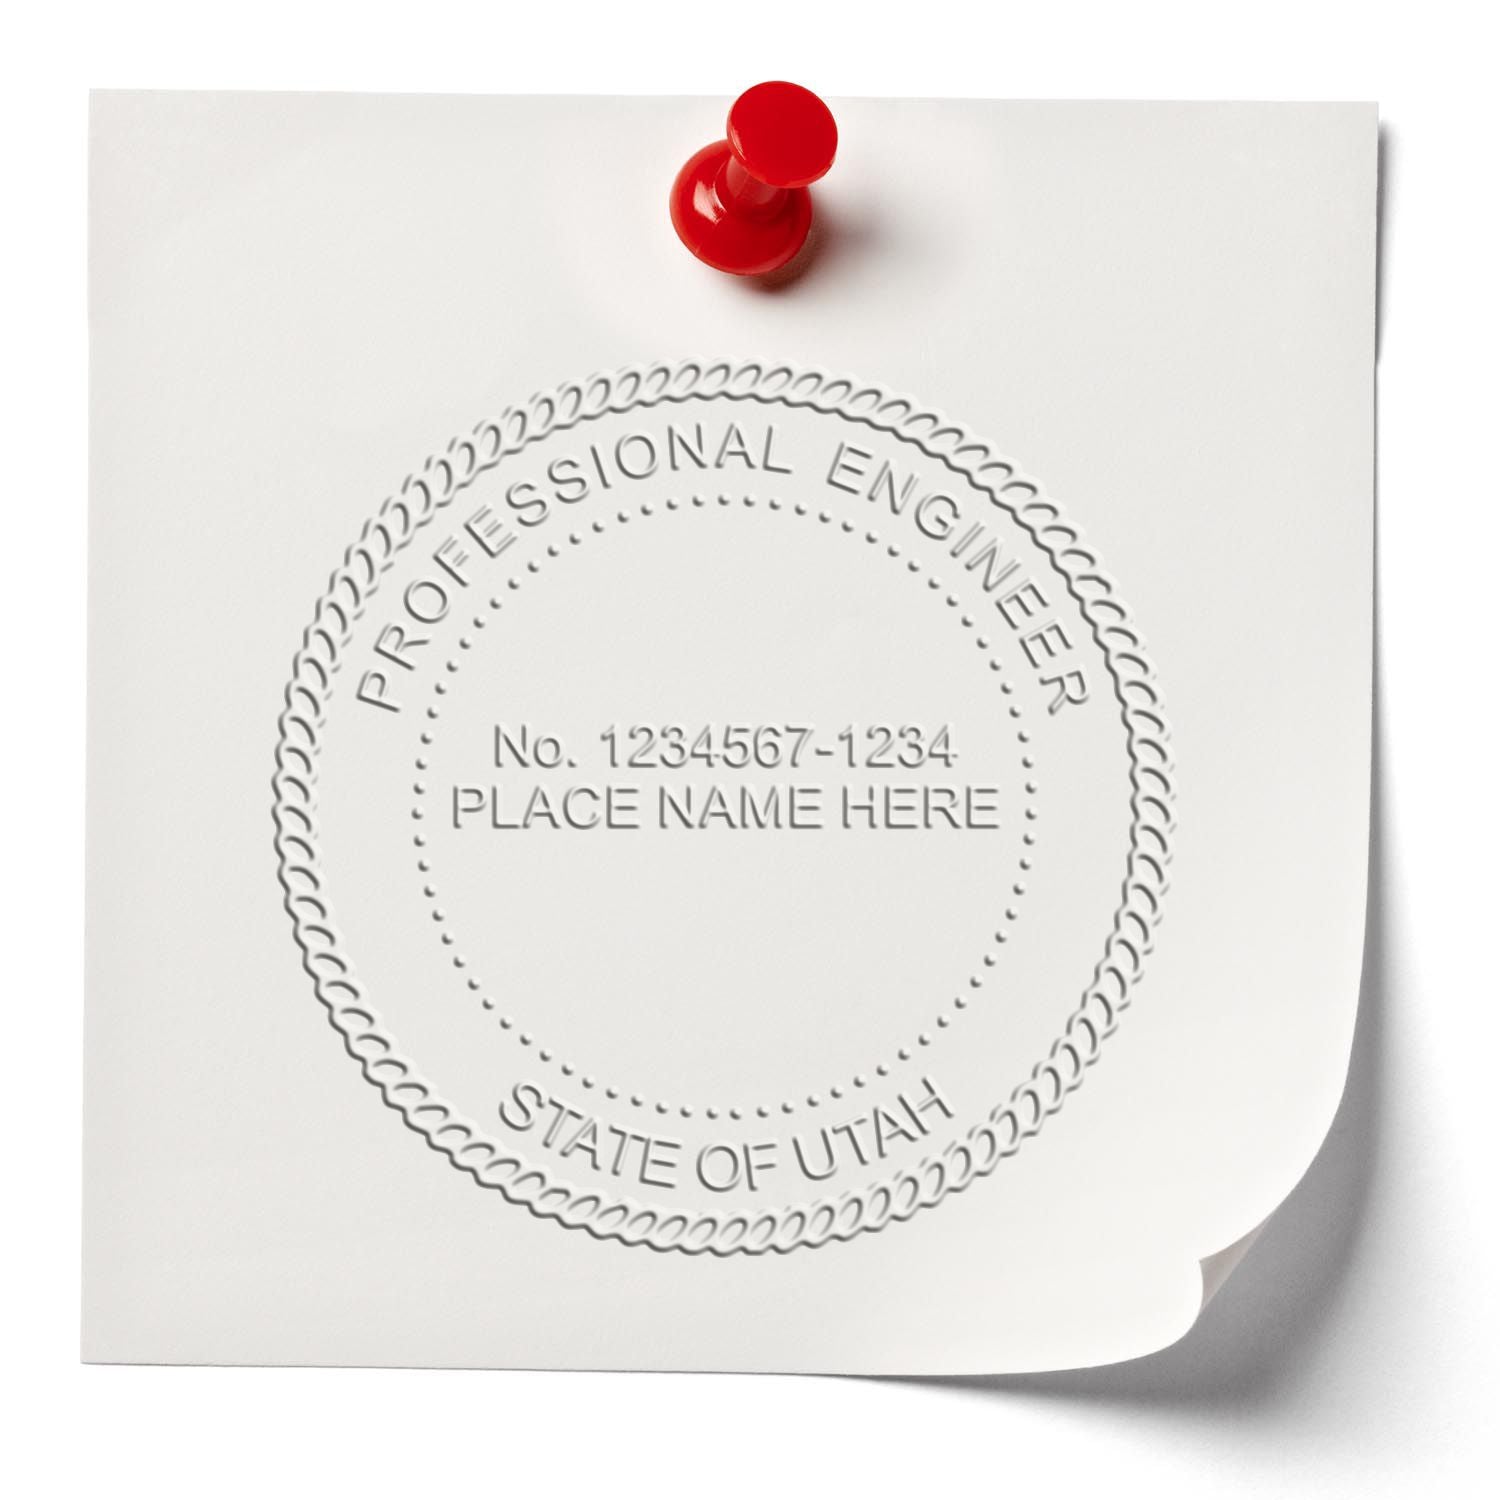 The Heavy Duty Cast Iron Utah Engineer Seal Embosser stamp impression comes to life with a crisp, detailed photo on paper - showcasing true professional quality.